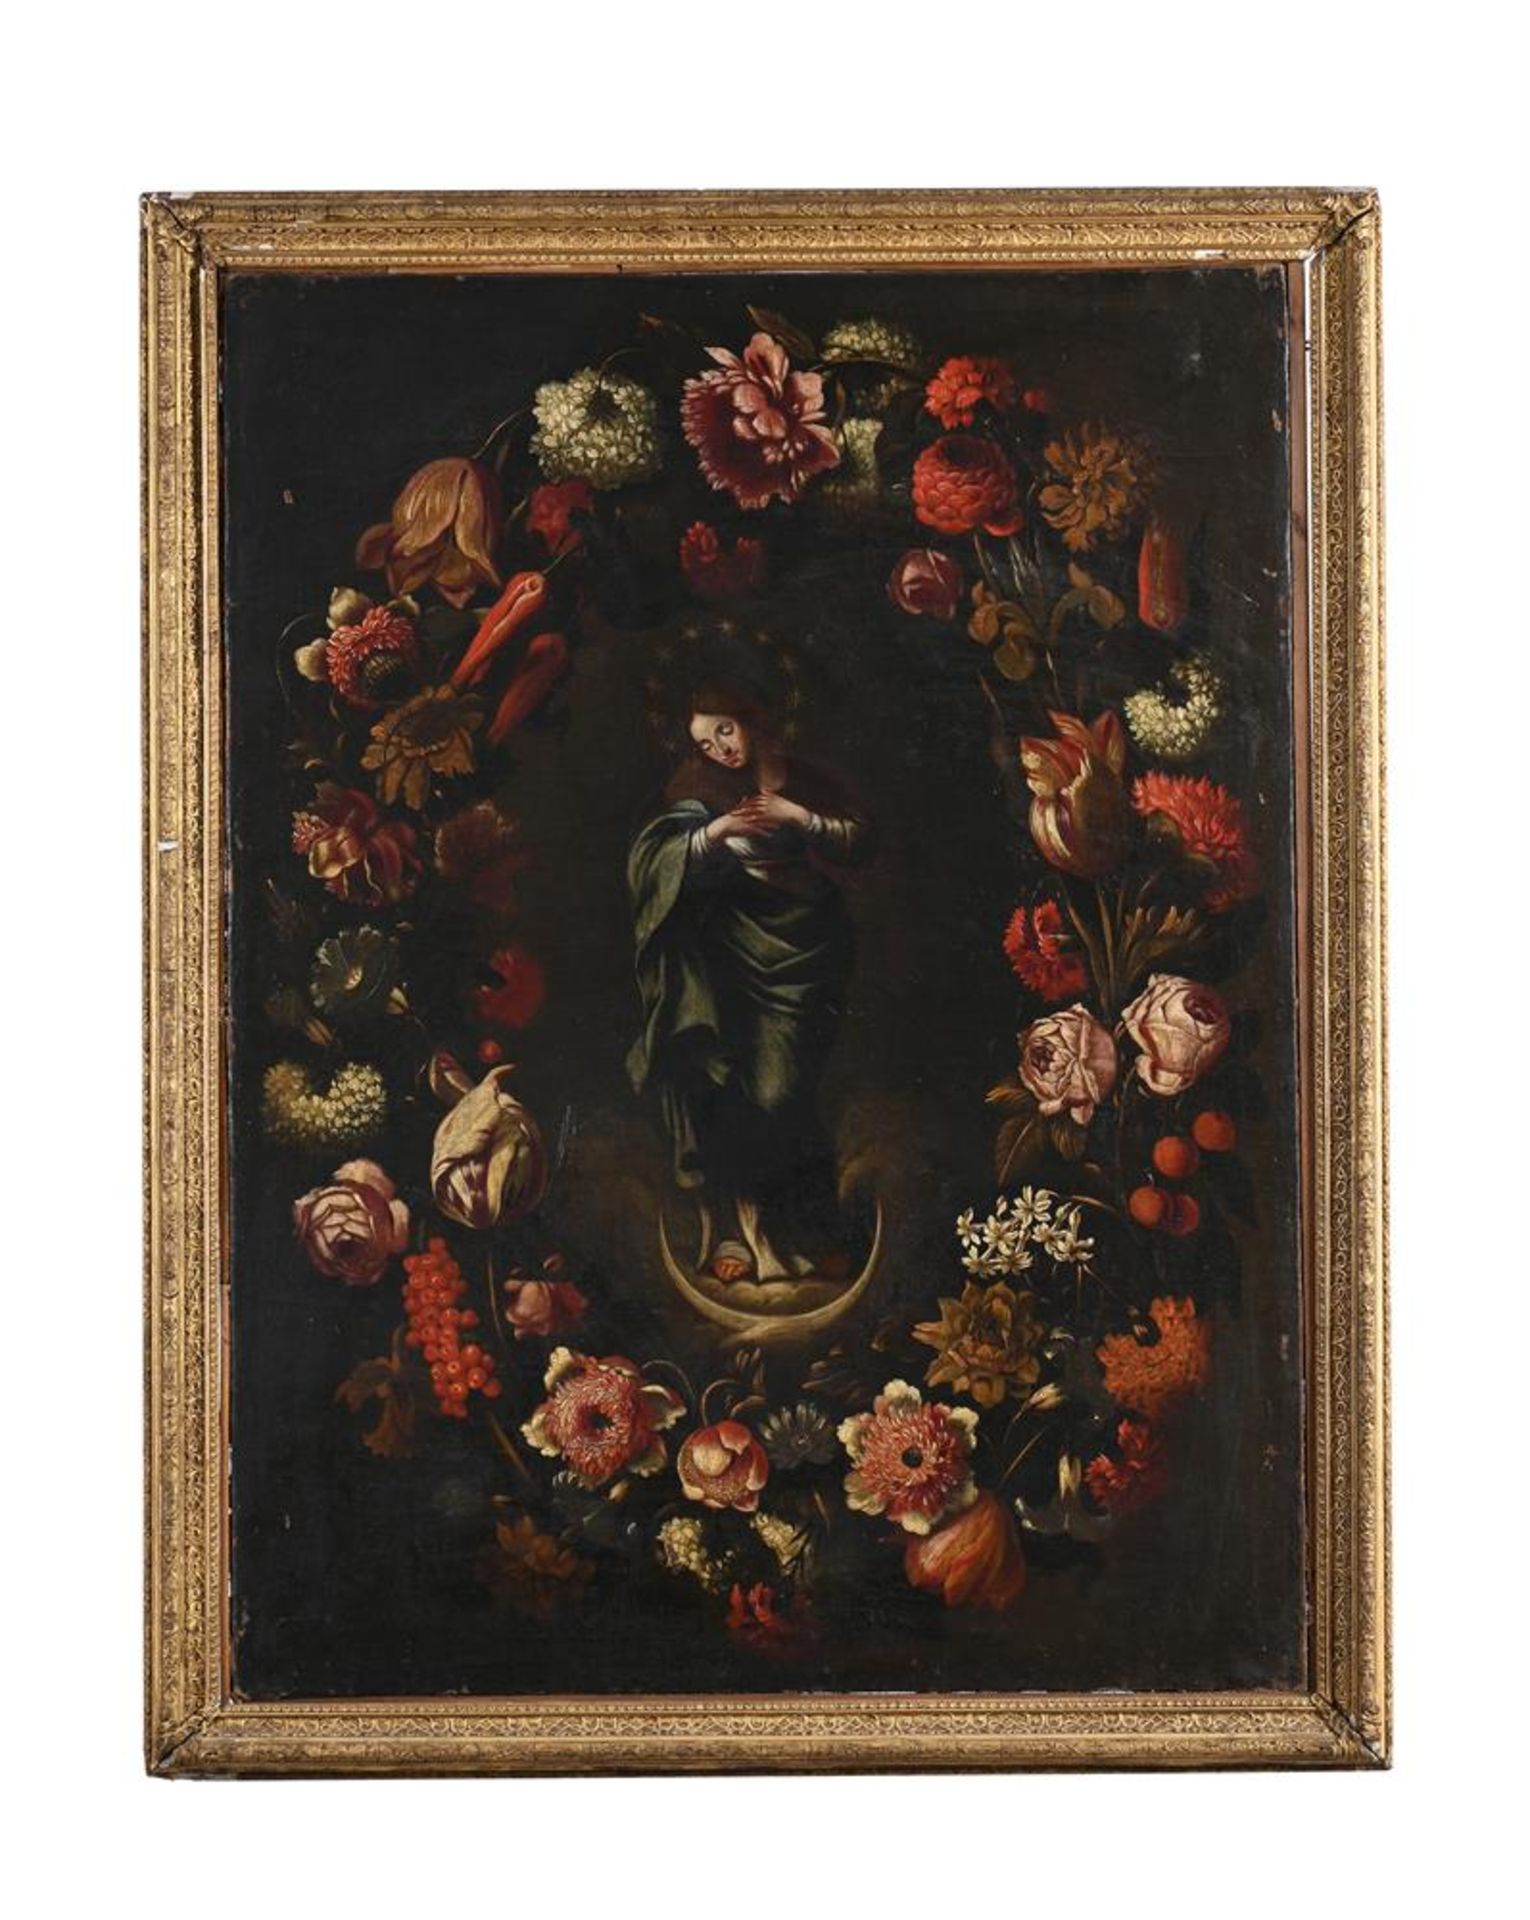 CIRCLE OF JAN BRUEGHEL THE YOUNGER (FLEMISH 1601 - 1678), THE MADONNA WITHIN A GARLAND OF FLOWERS - Image 2 of 3